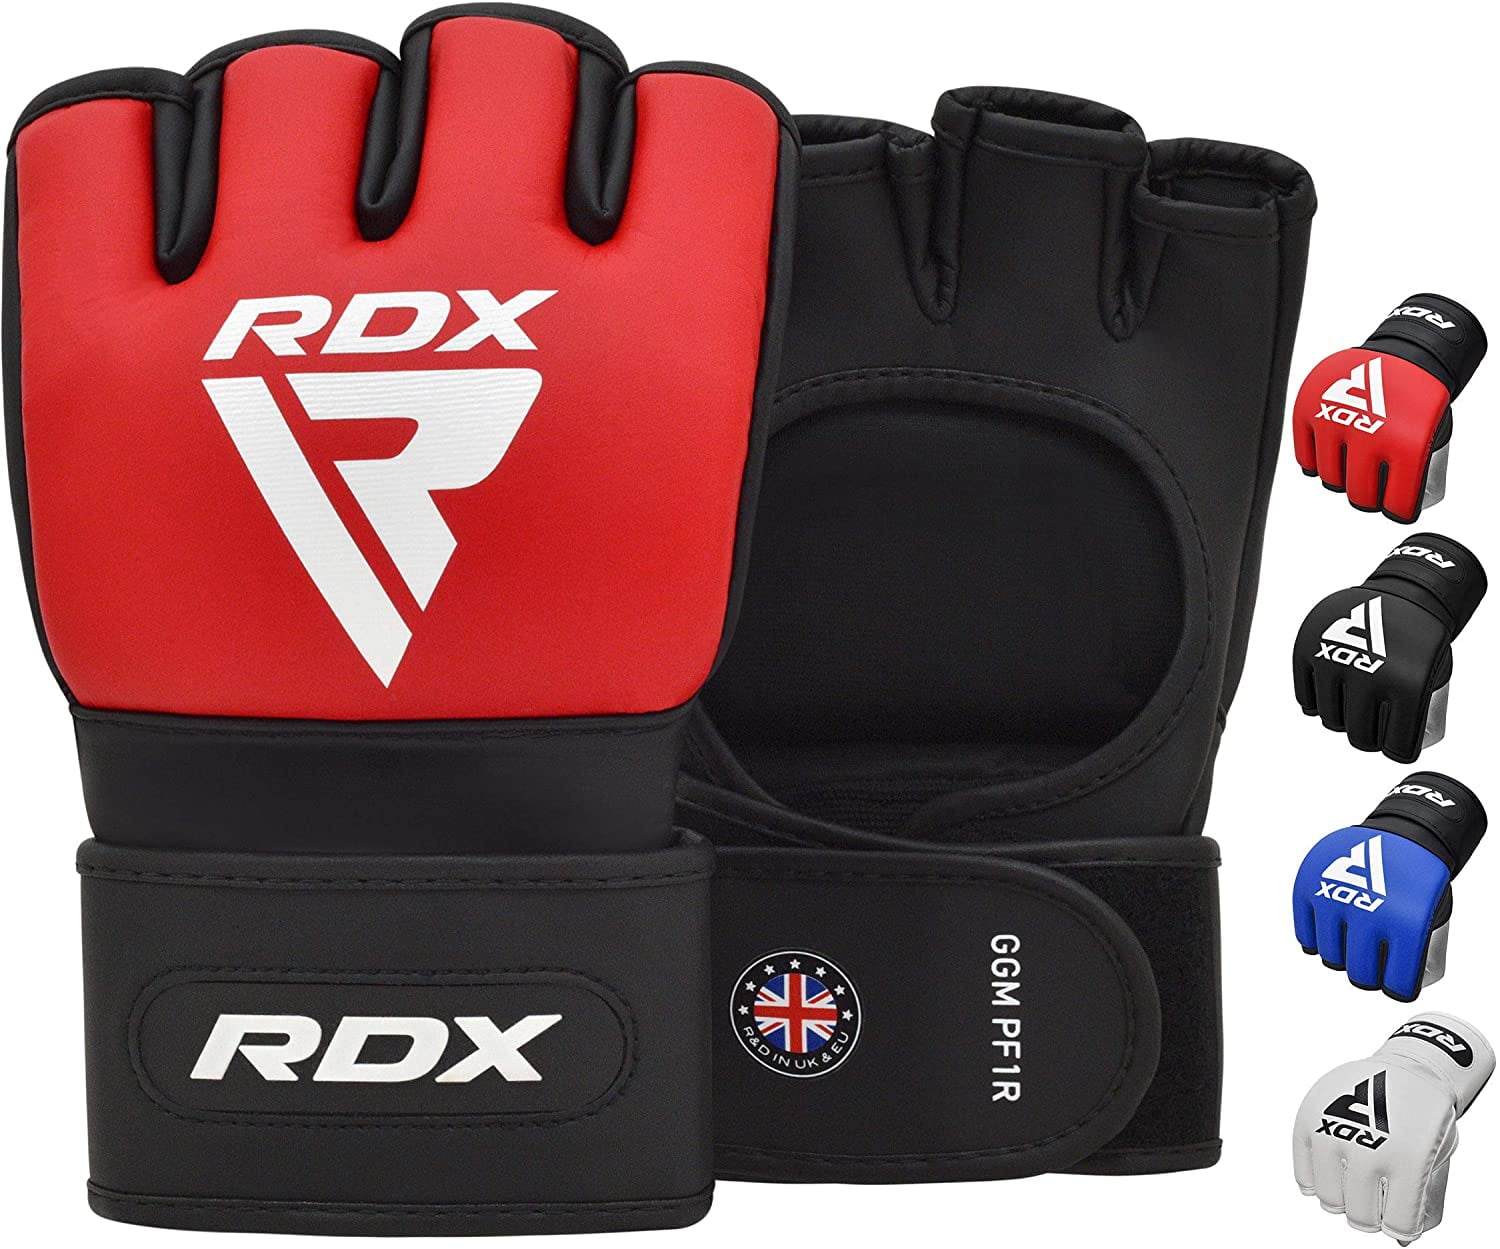 MMA Grappling Gloves Punch Bag Boxing UFC Cage Fight Training Muay Thai RAX 